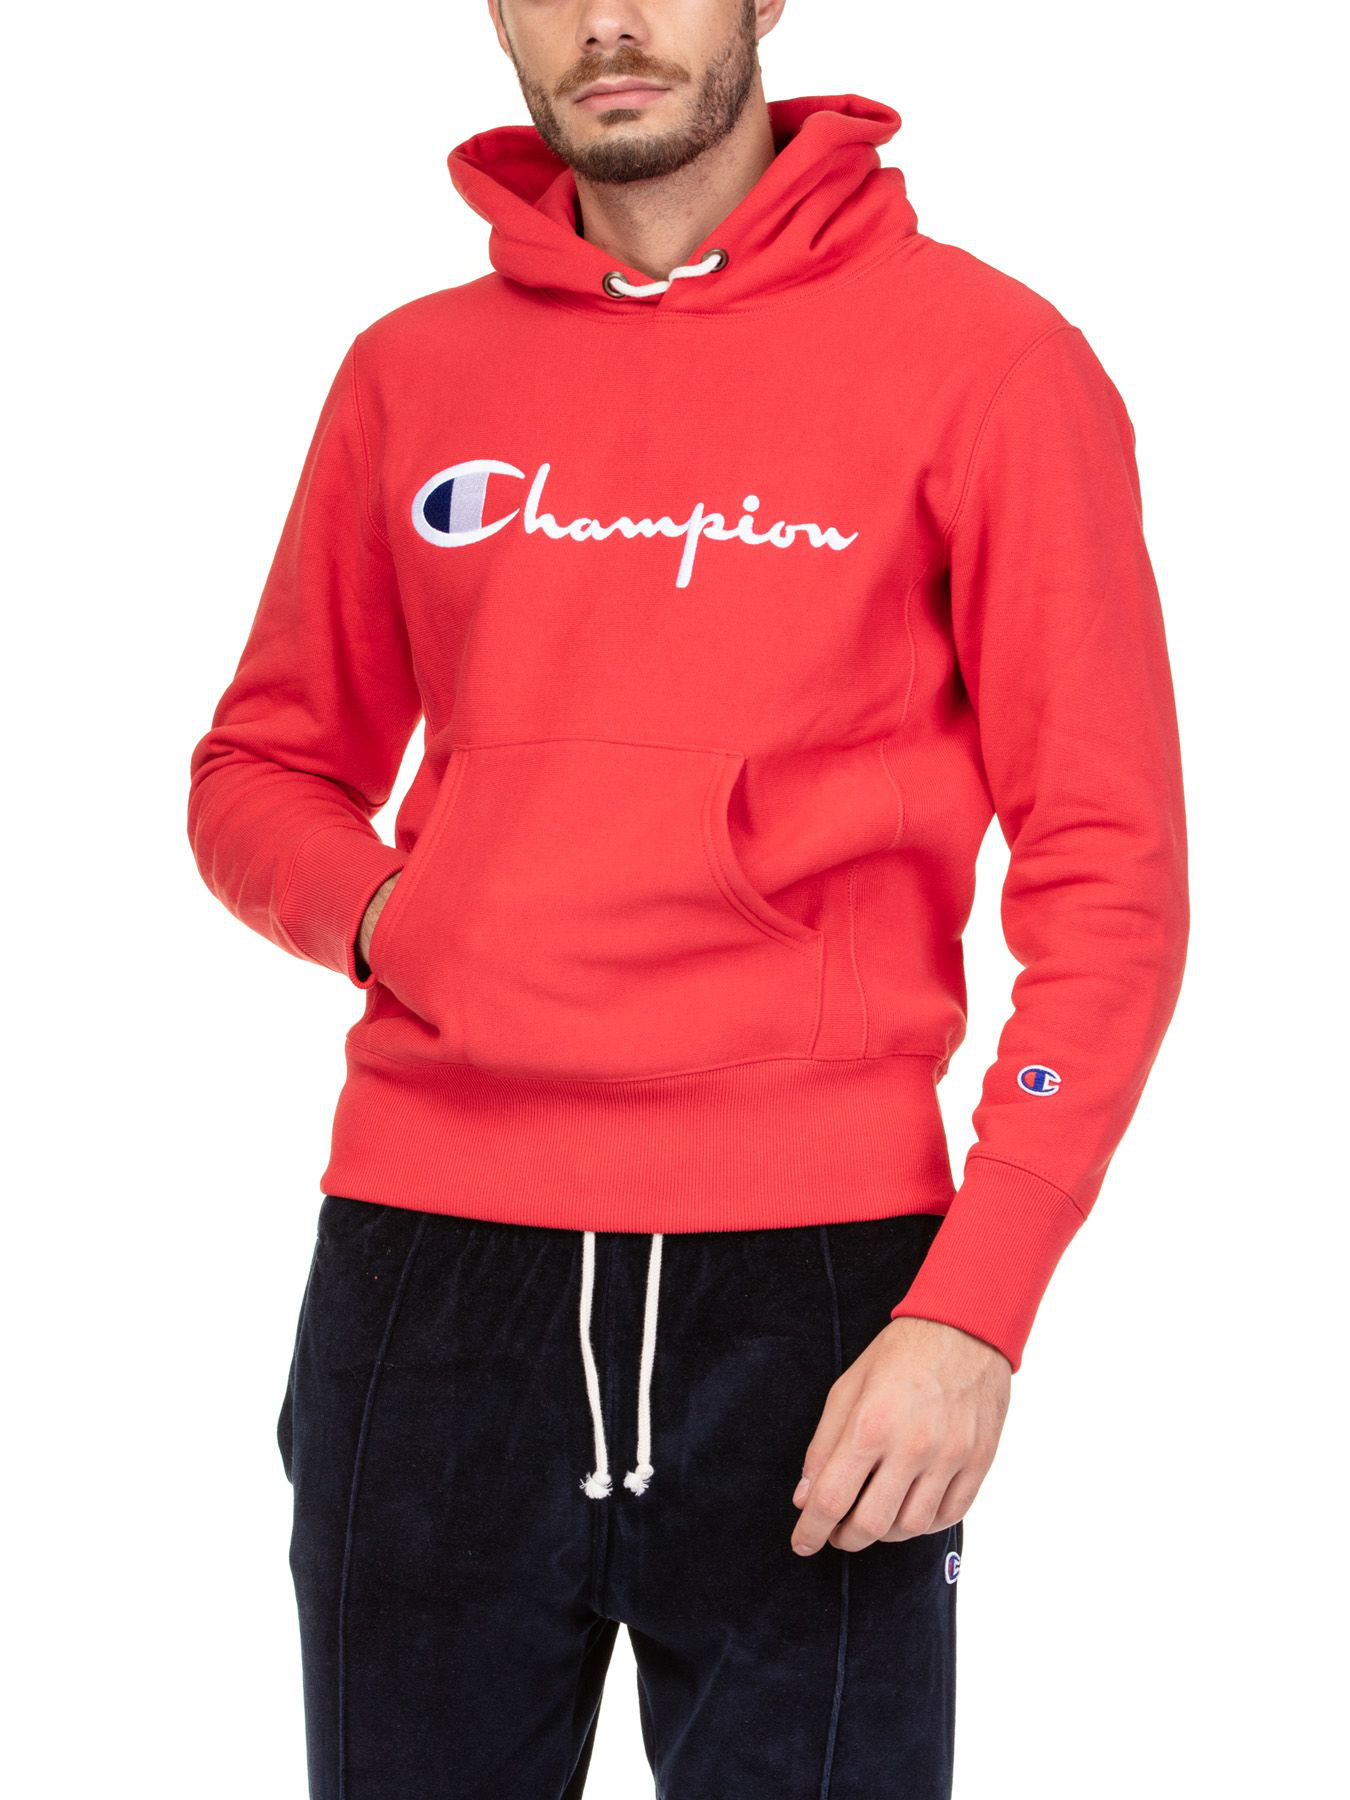 red white and blue champion hoodie